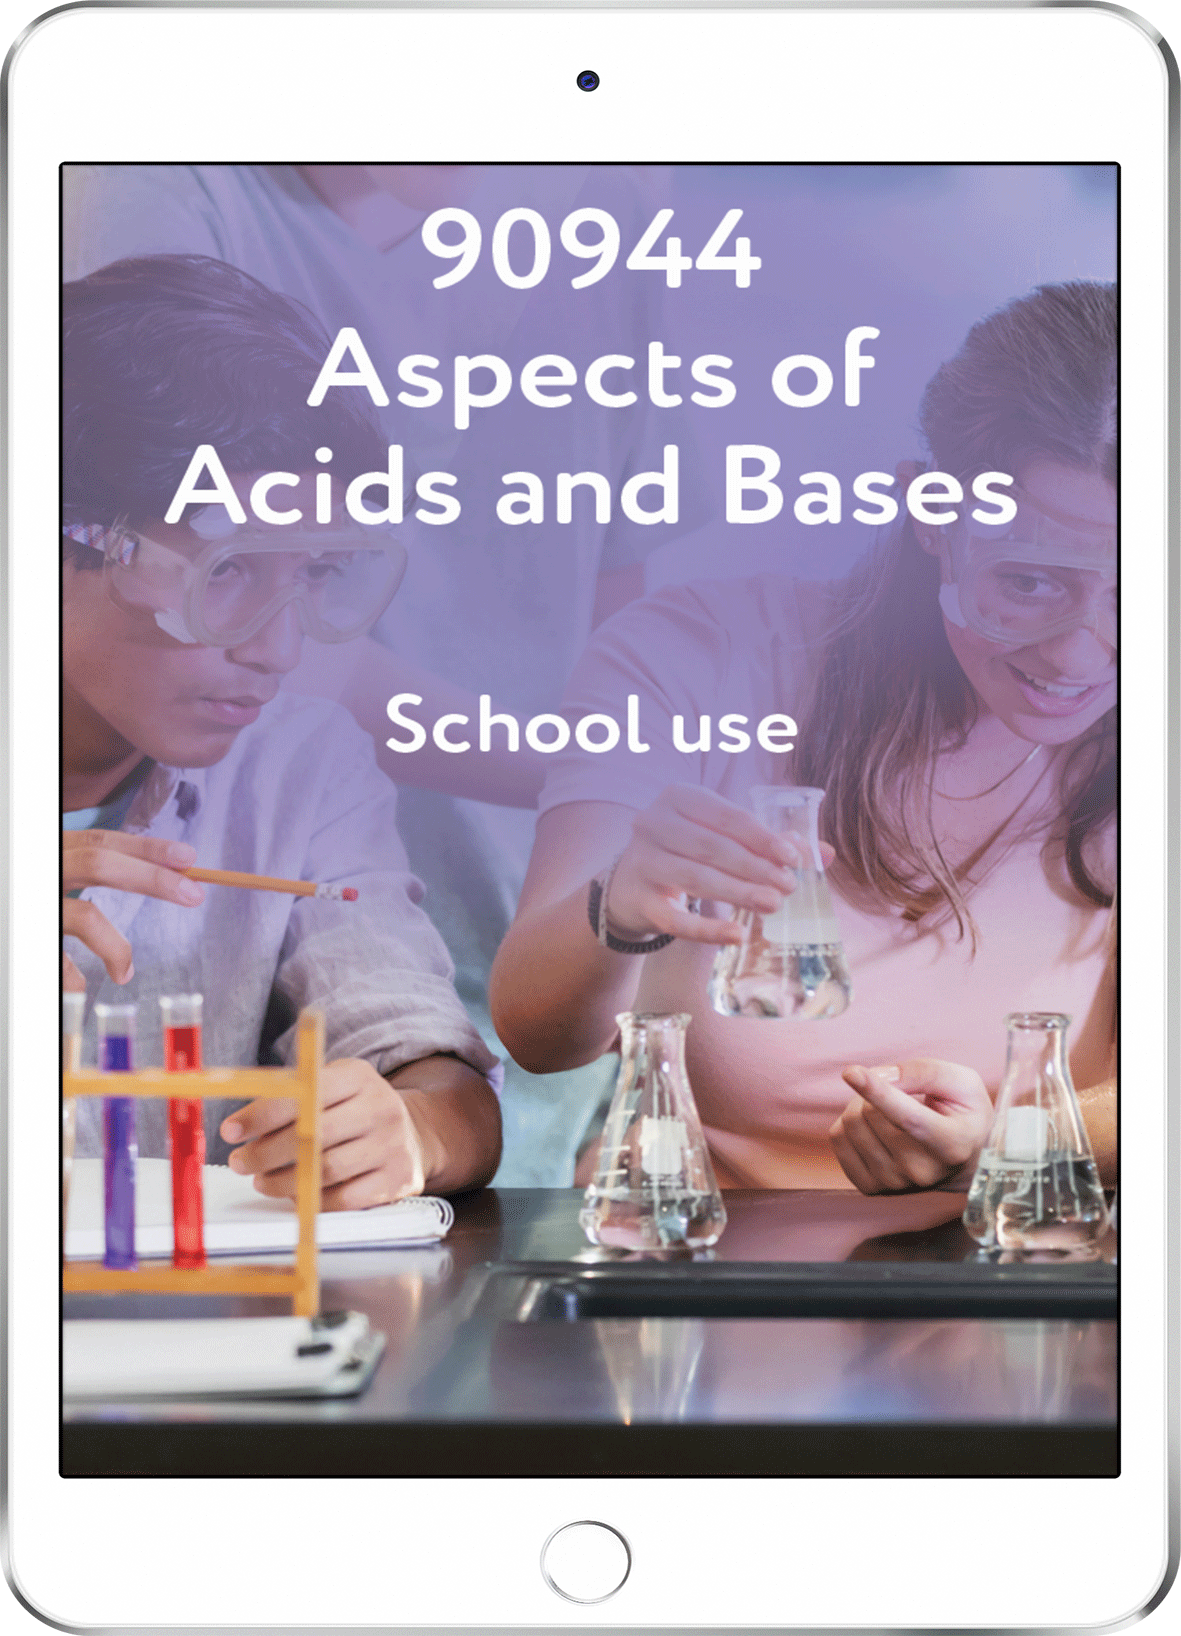 90944 Aspects of Acids and Bases - School Use